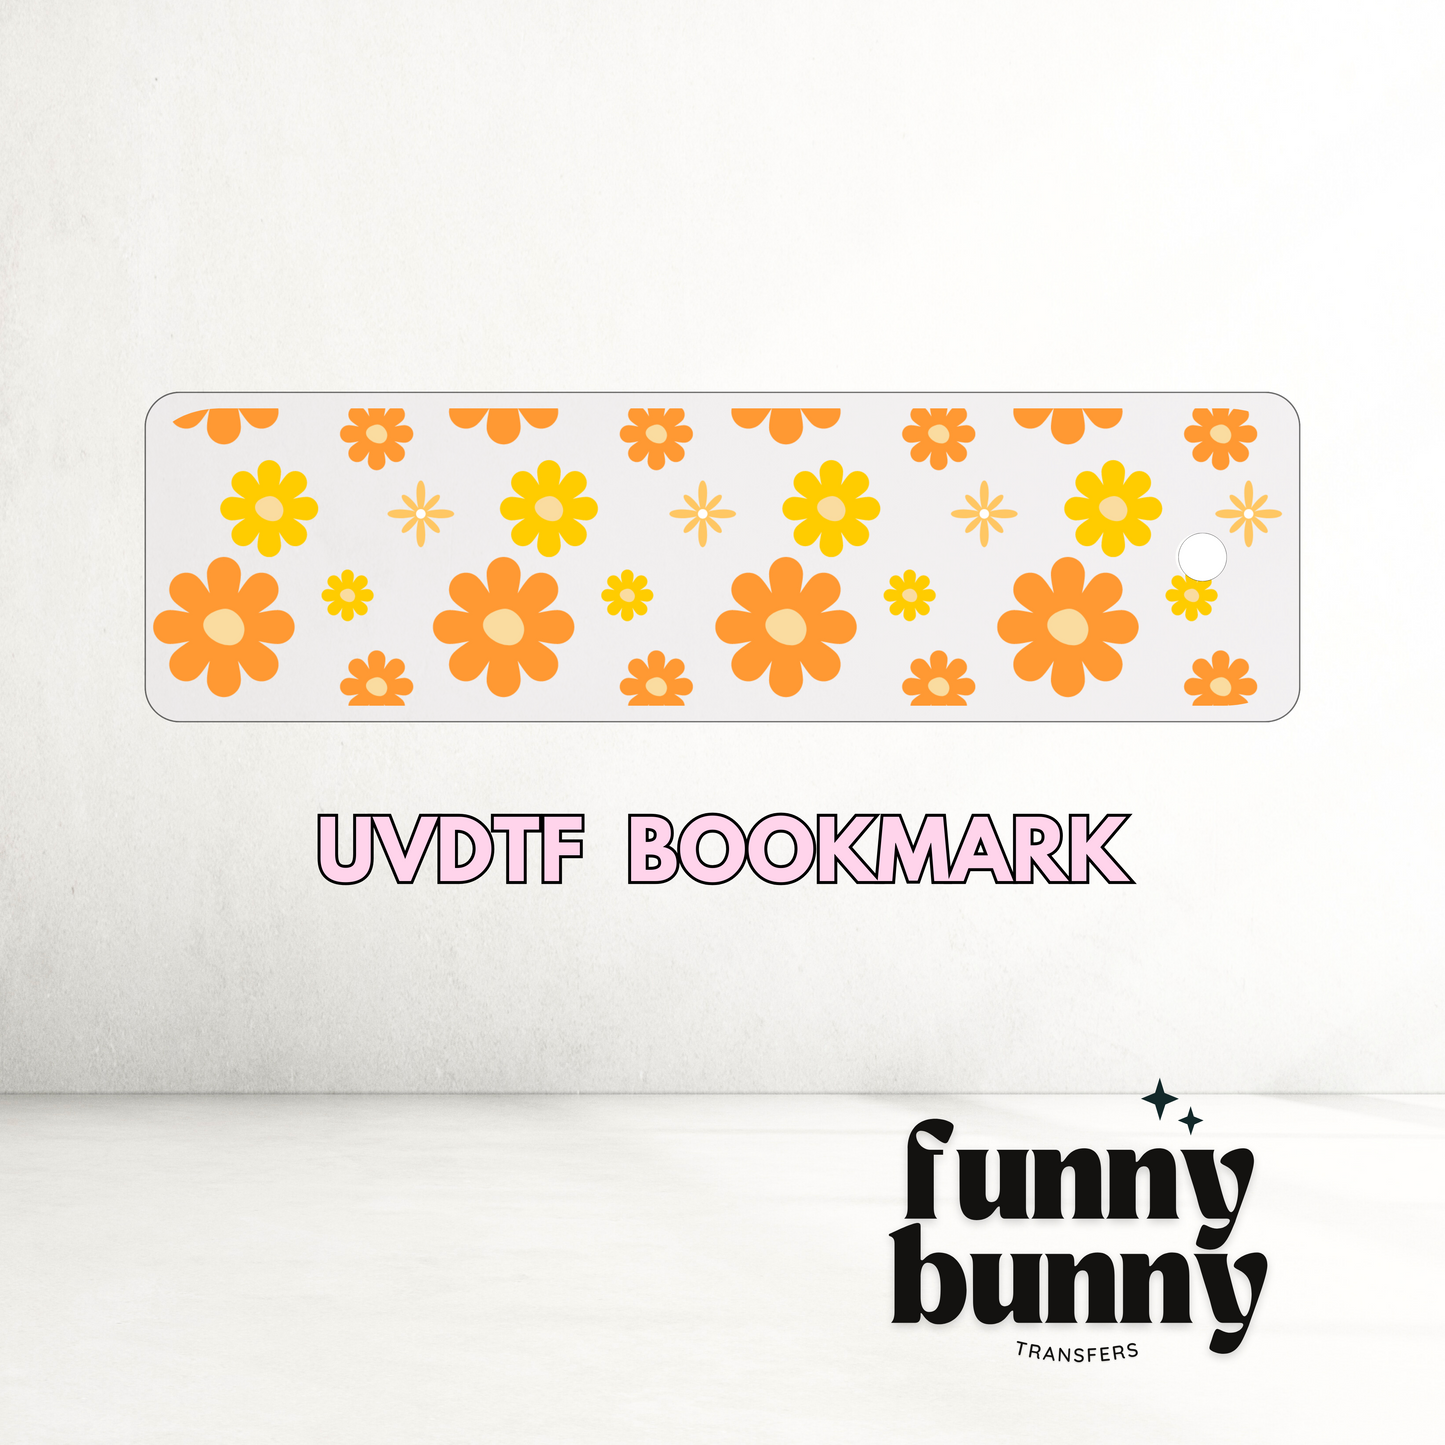 Sunset Daisies - UVDTF Bookmark Decal